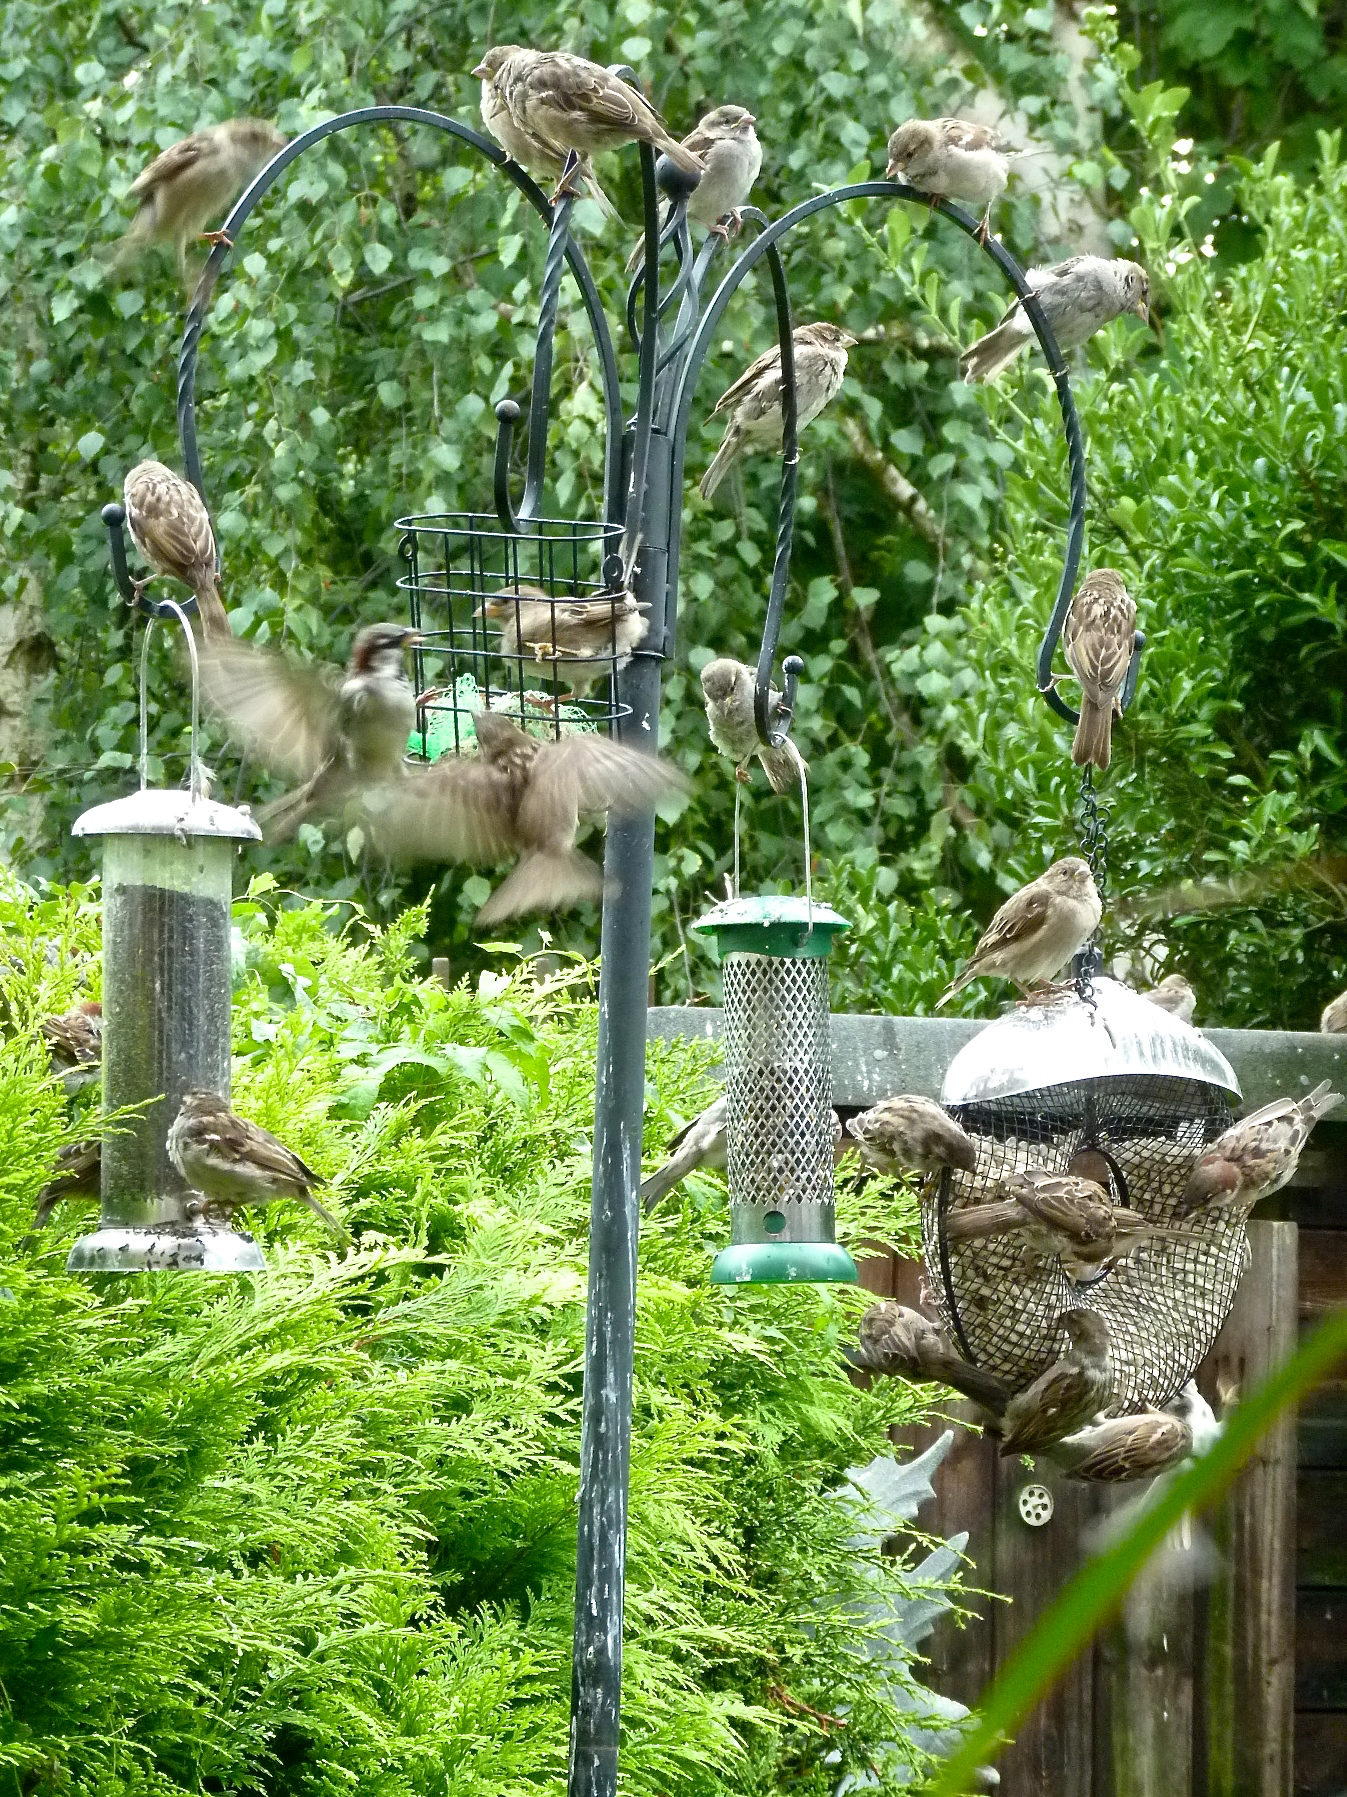  This is our bird feeder.&nbsp;I protect the birds who eat here from Foxykins and from kitty cats. If someone shouts "Kitty!", I run into the garden barking and chase the cats away! Kitty is a word I know. The birds in this picture are called sparrow